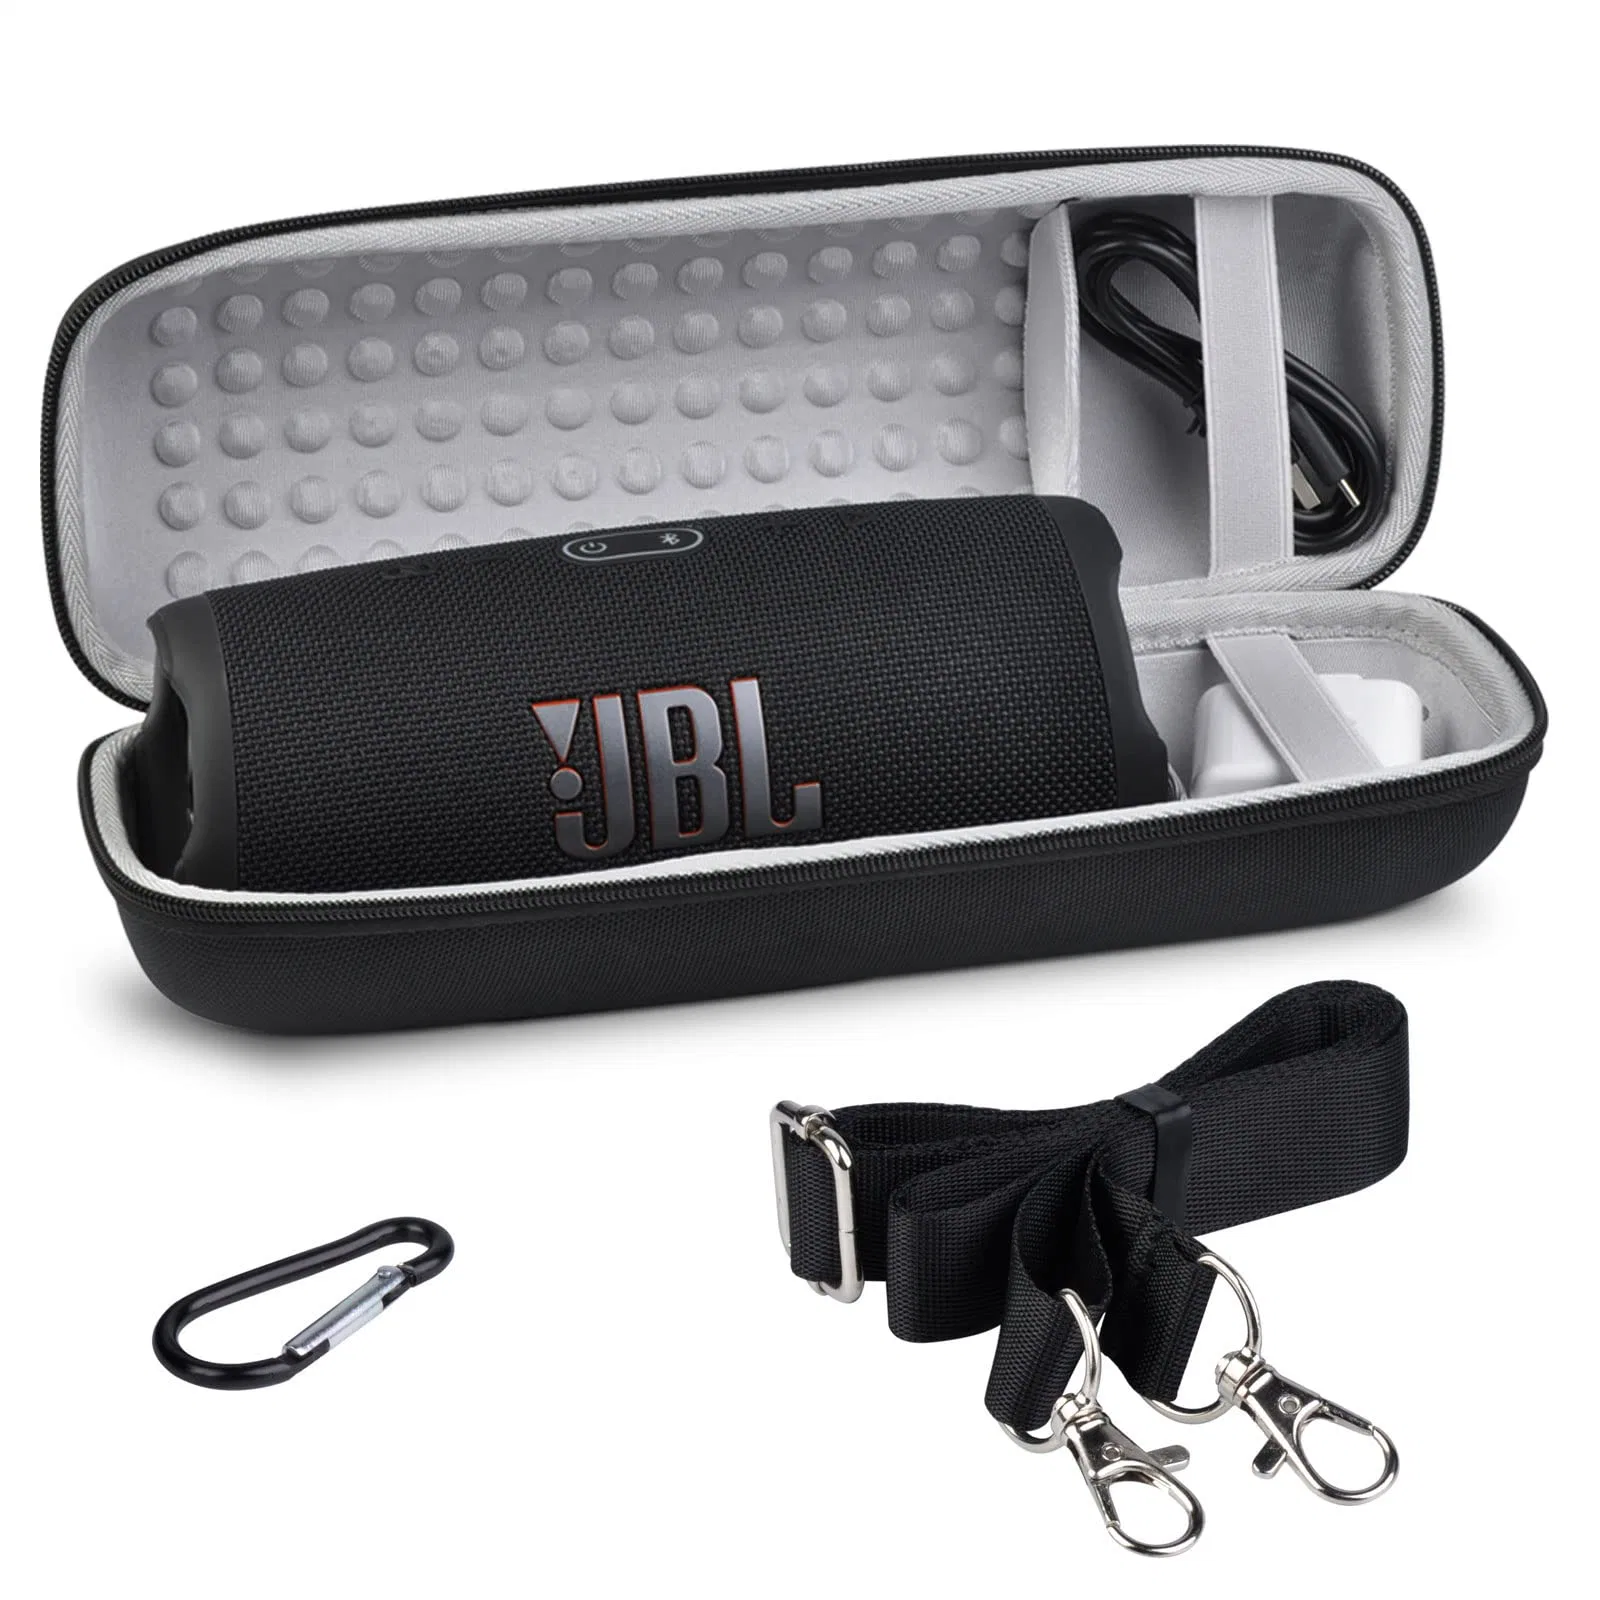 Hard Travel Case for Jbl Charge 4/Jbl Charge 5 Wireless Bluetooth Speaker Protective Carrying Case